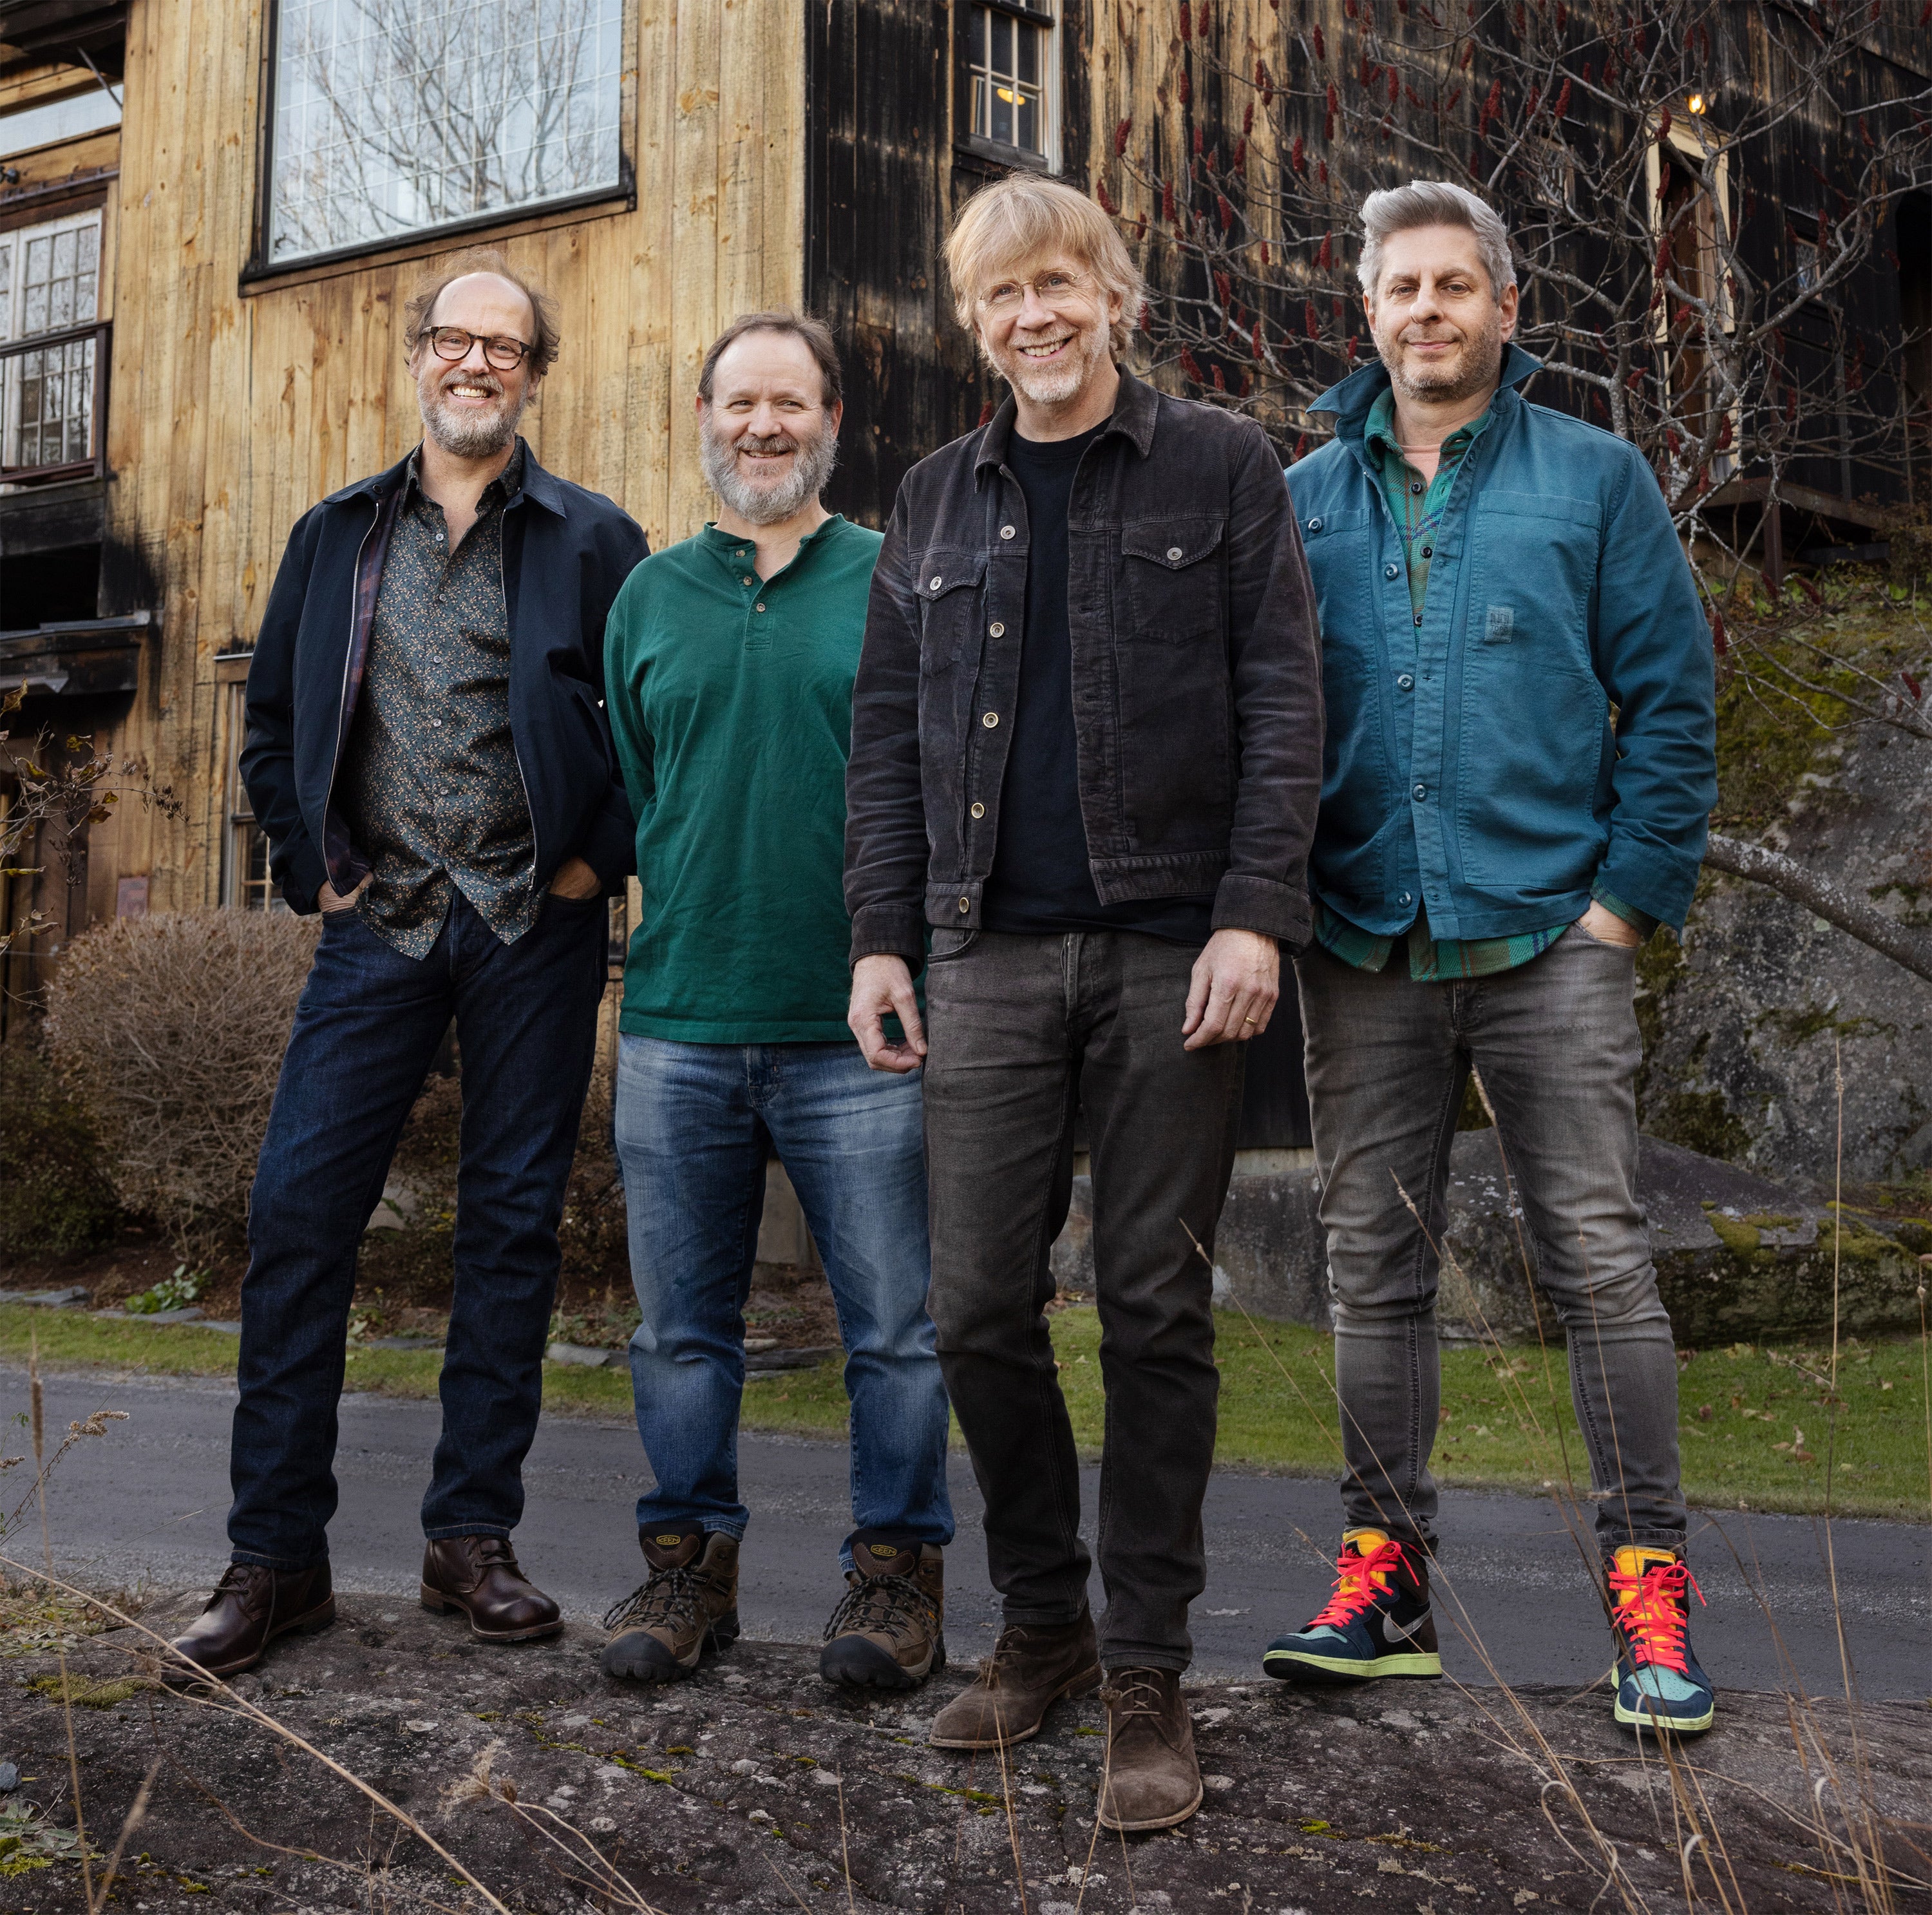 new presale password for Phish face value tickets in Grand Rapids at Van Andel Arena